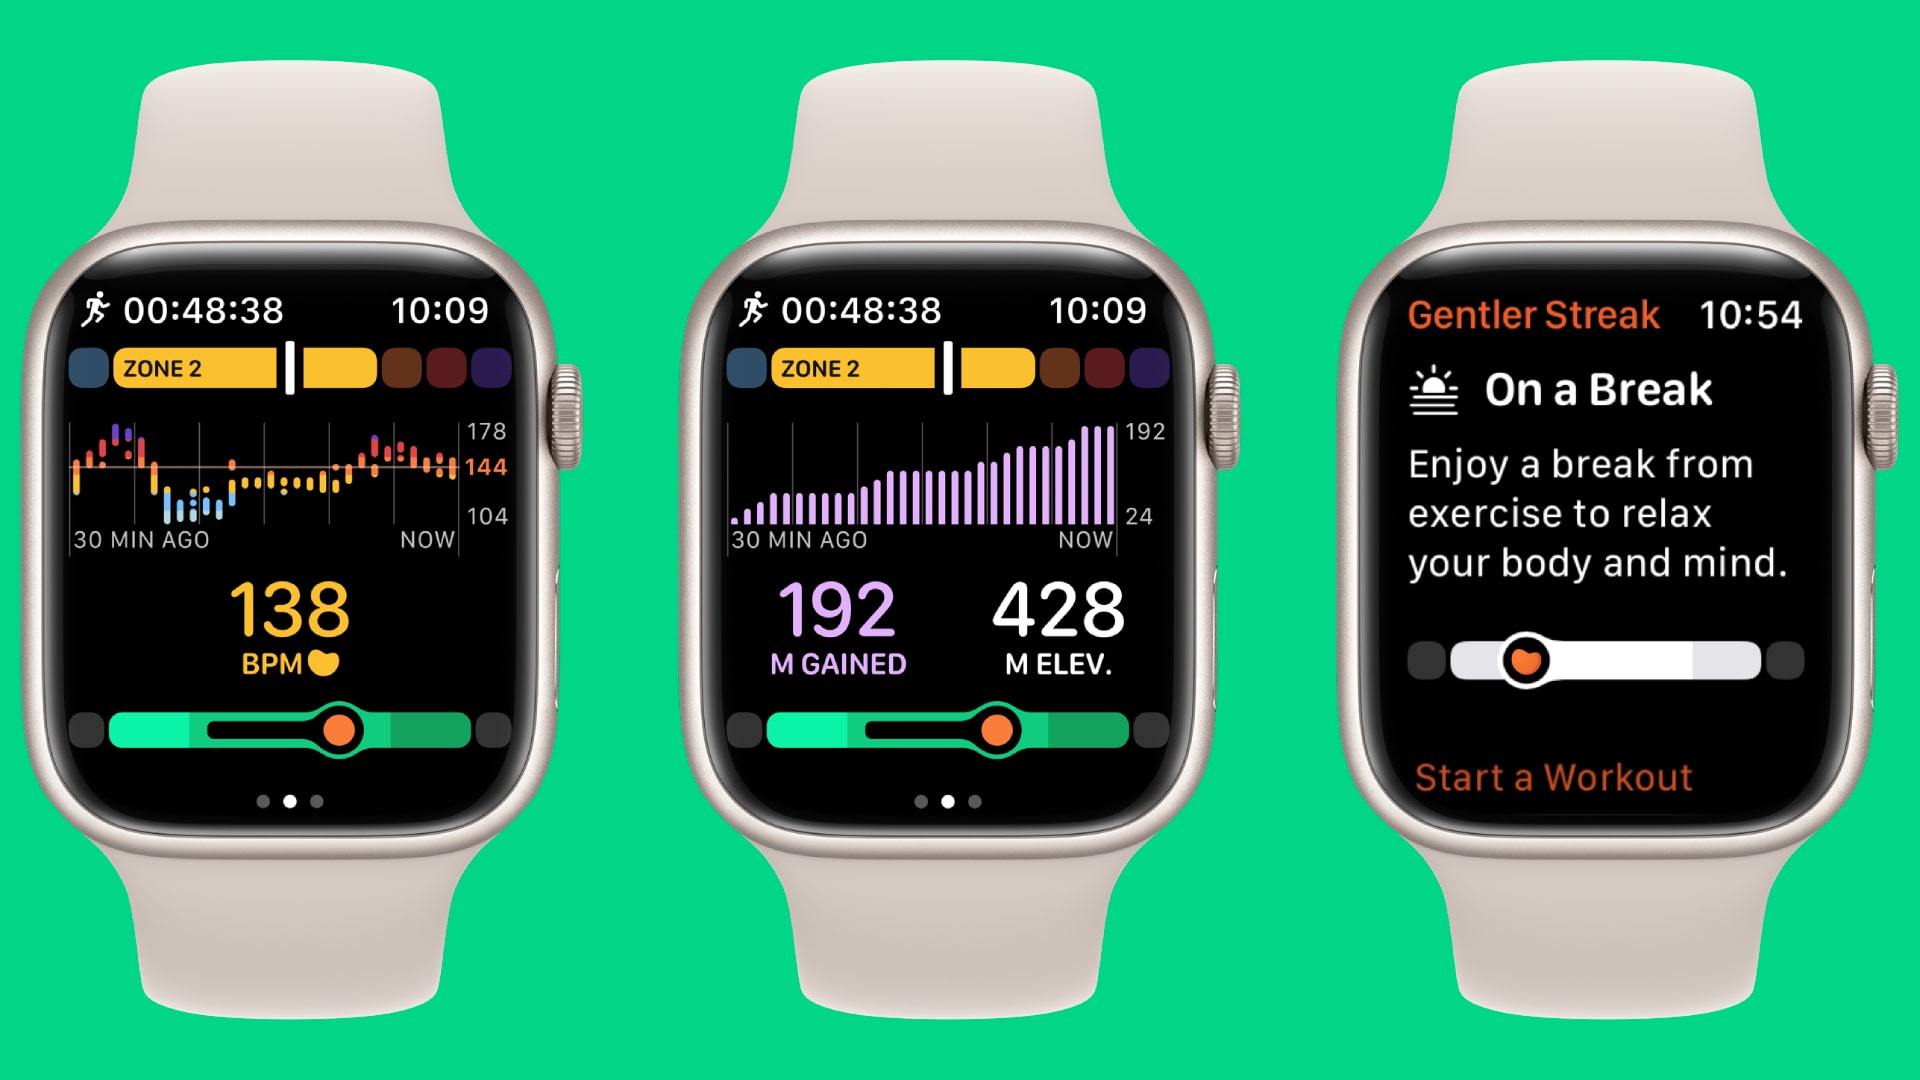 Three Apple Watches side by side with the Gentler Streak app running on each of them.